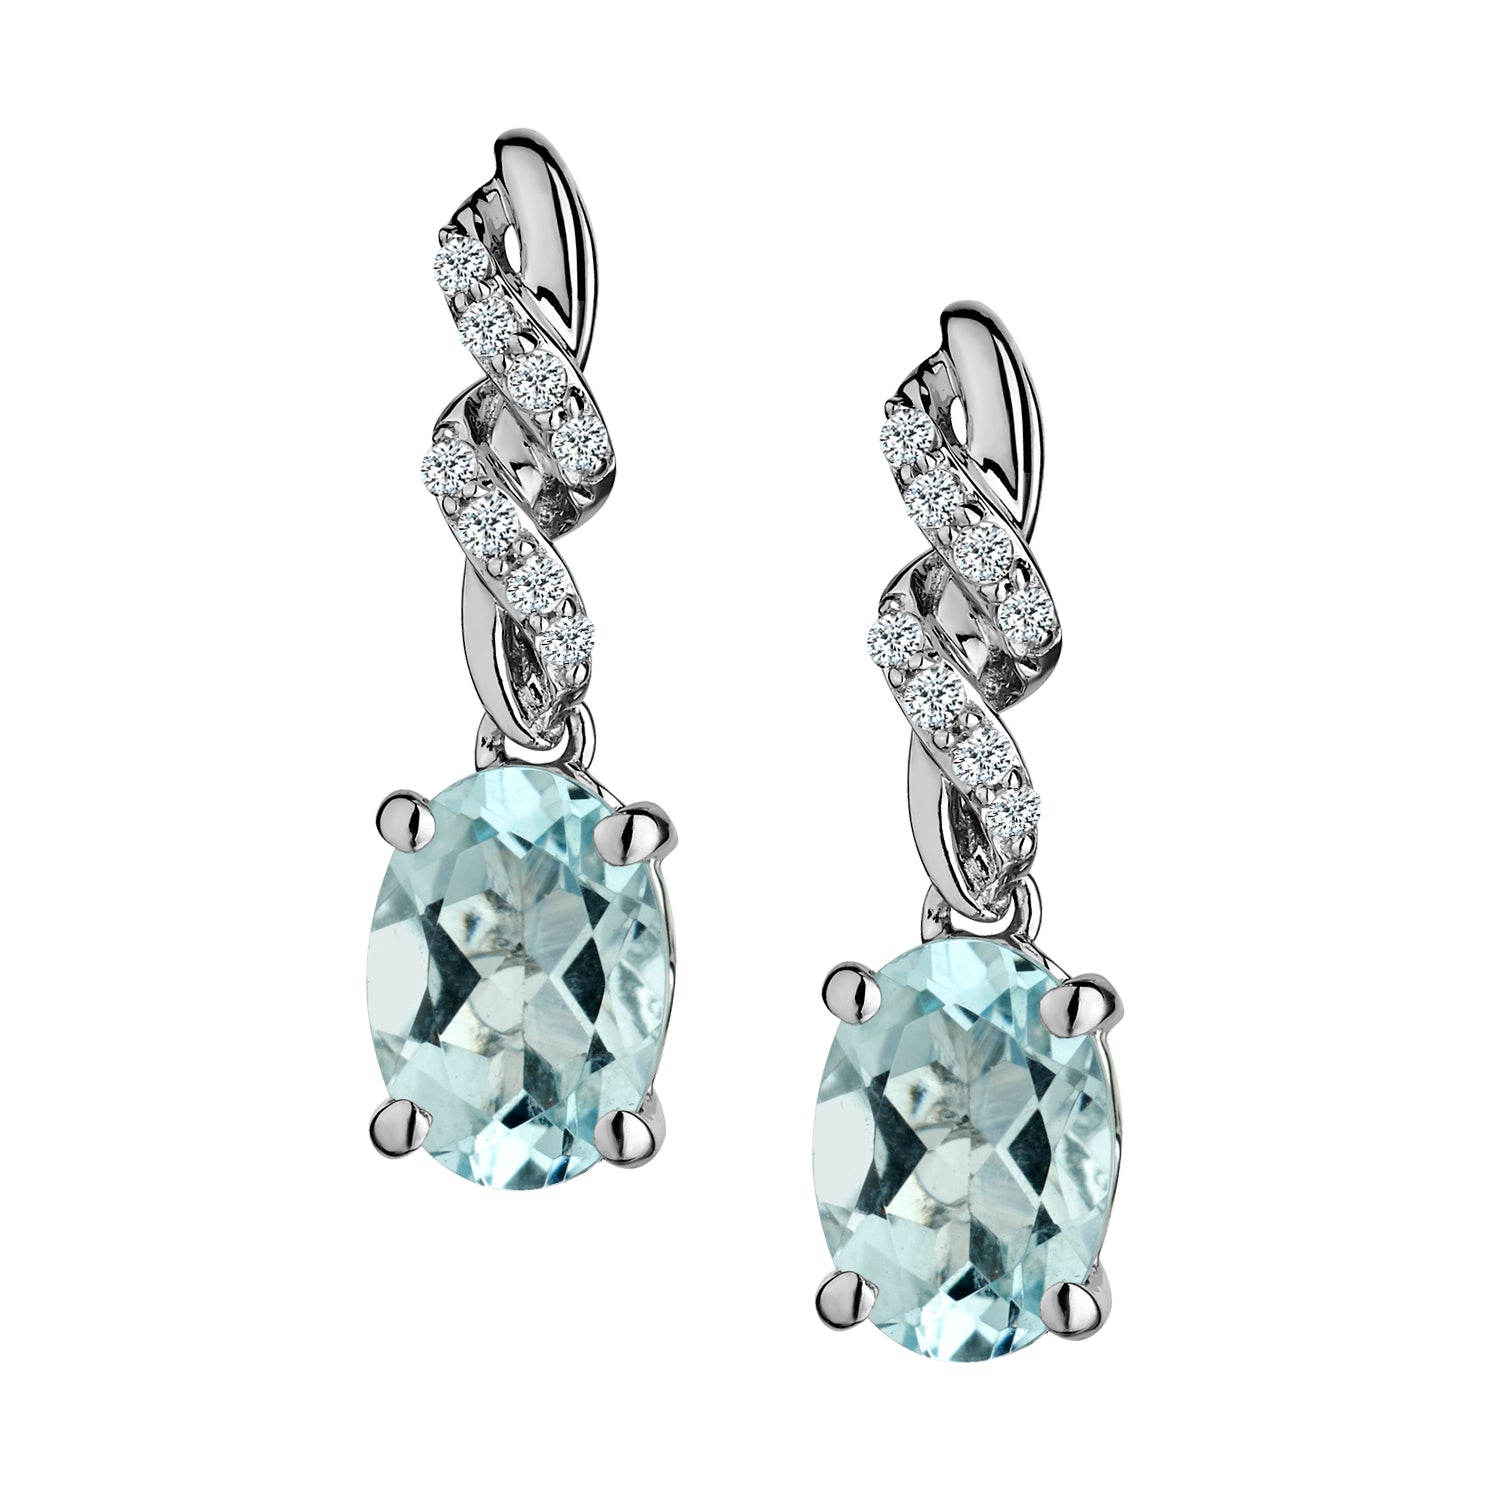 Genuine Aquamarine And White Sapphire Drop Earrings, Silver......................NOW